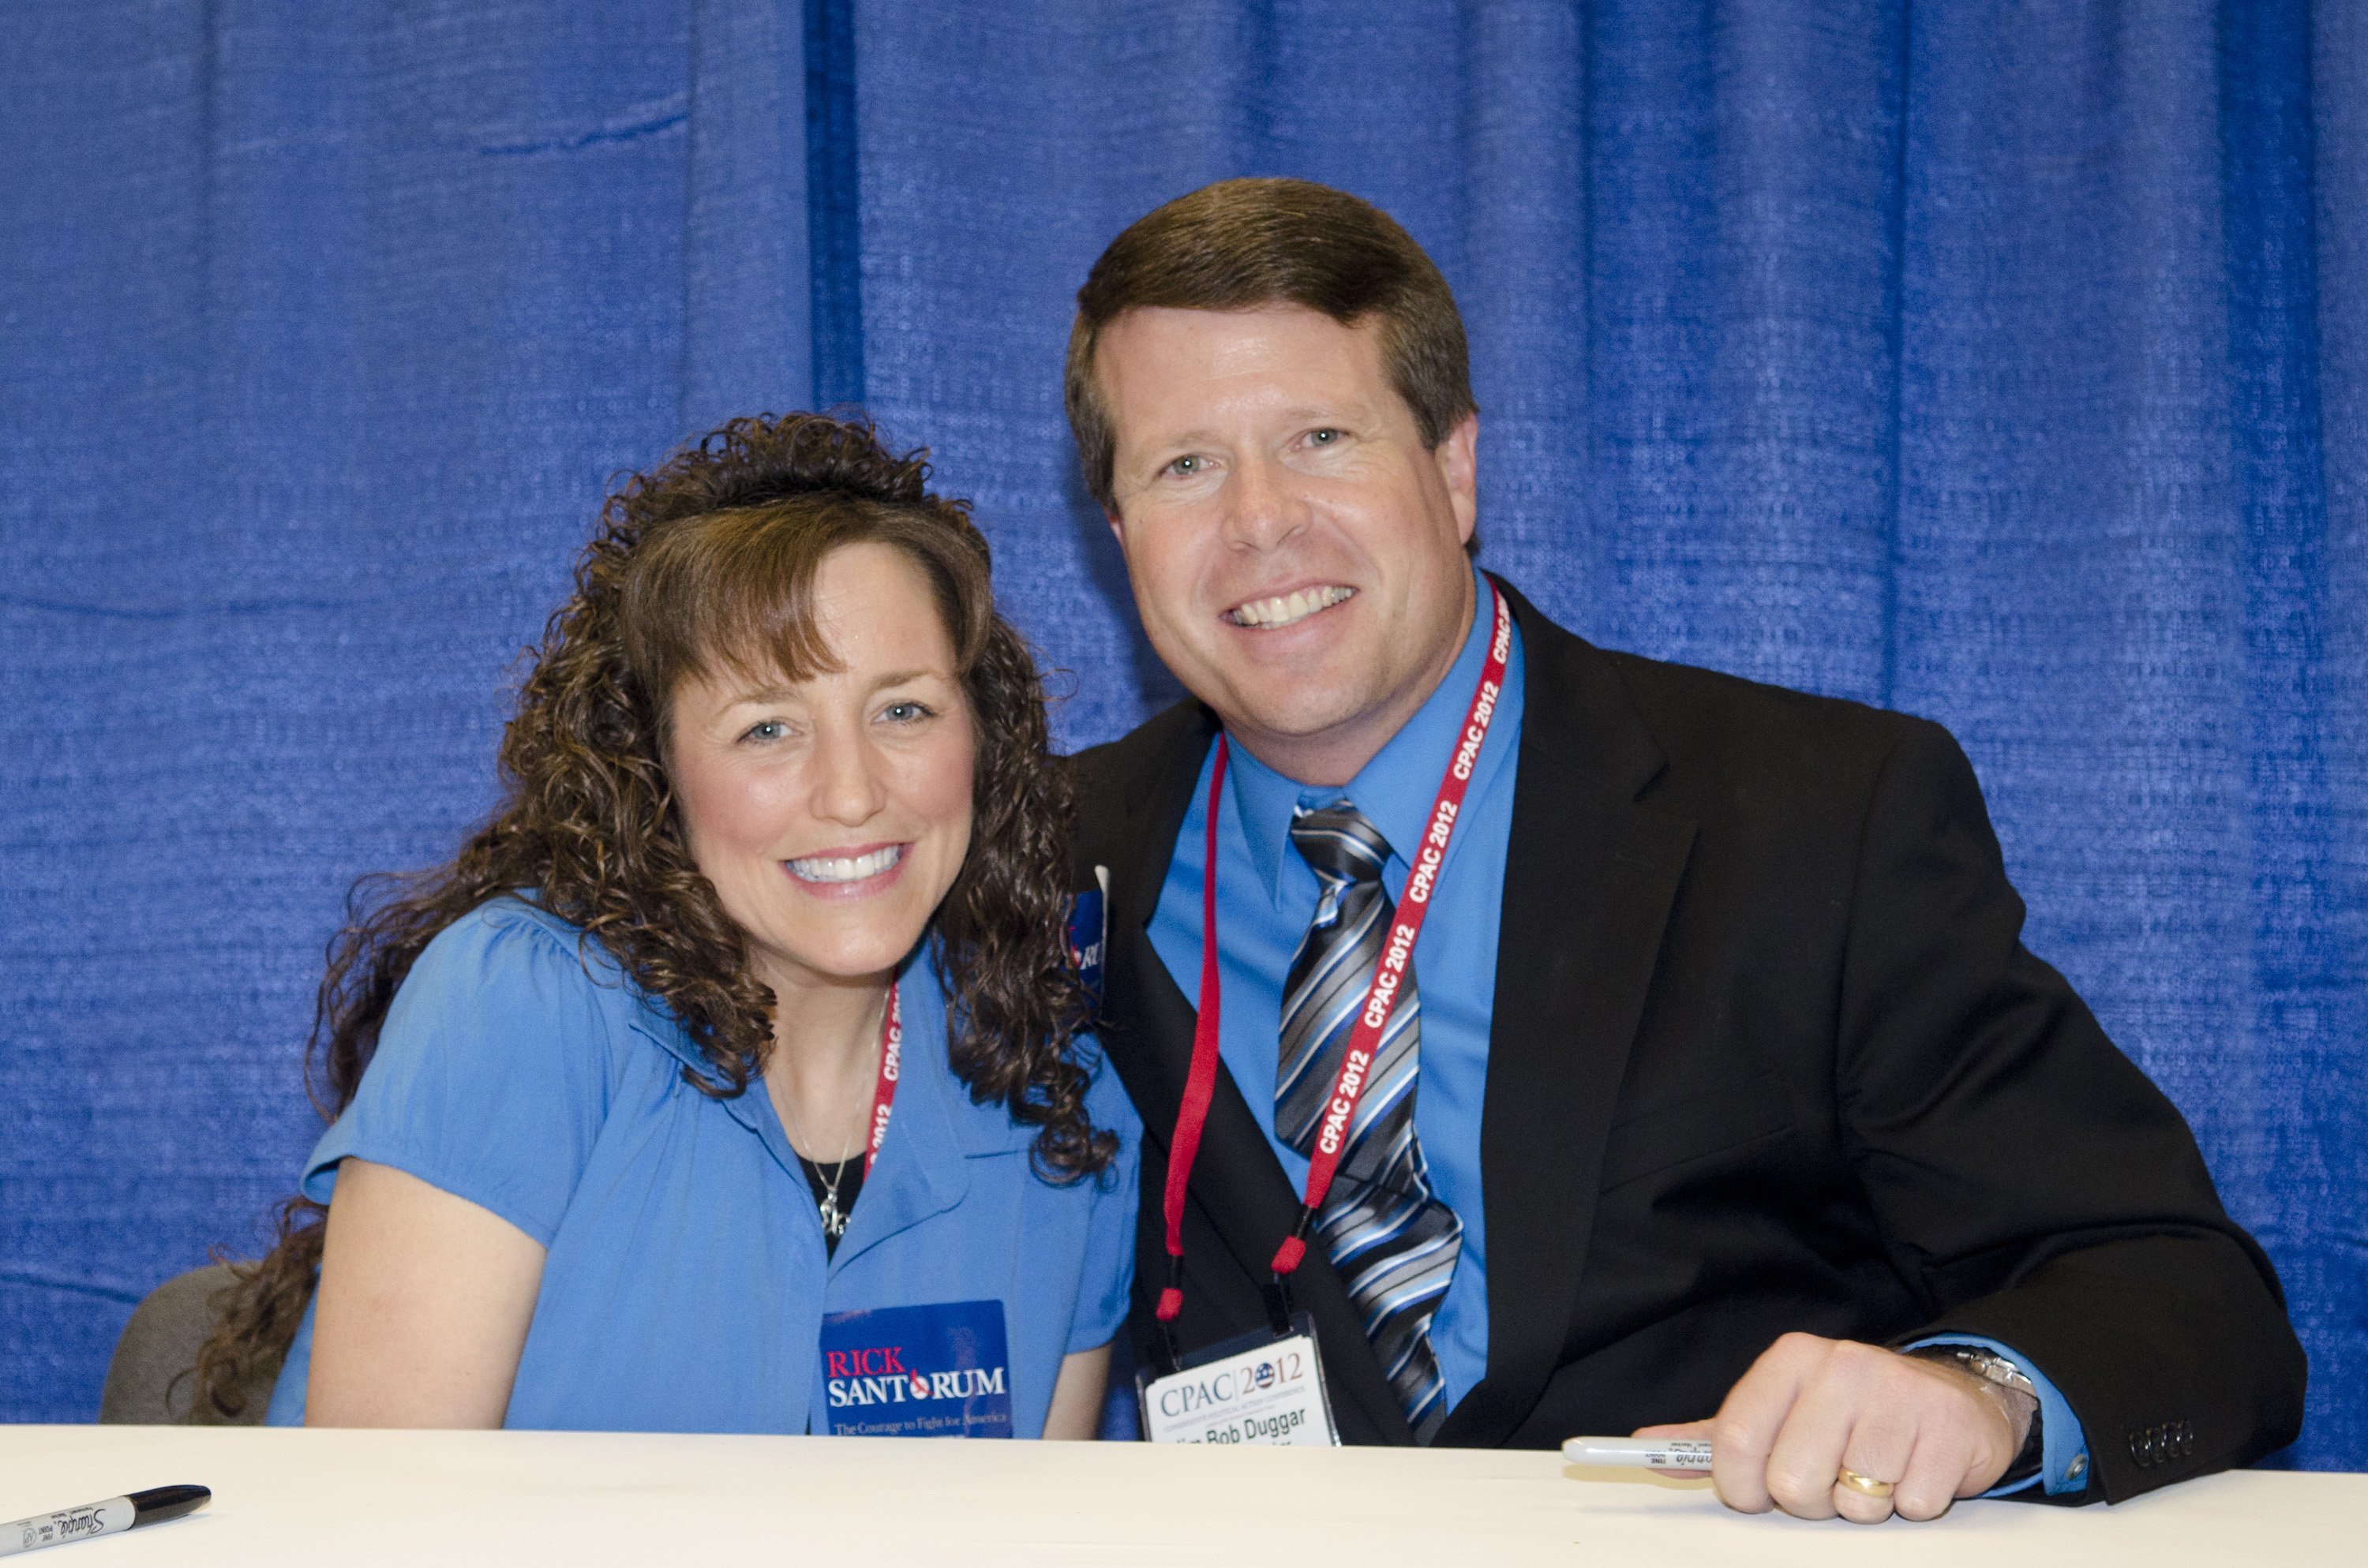 Jim Bob and Michelle Duggar. | Source: Getty Images